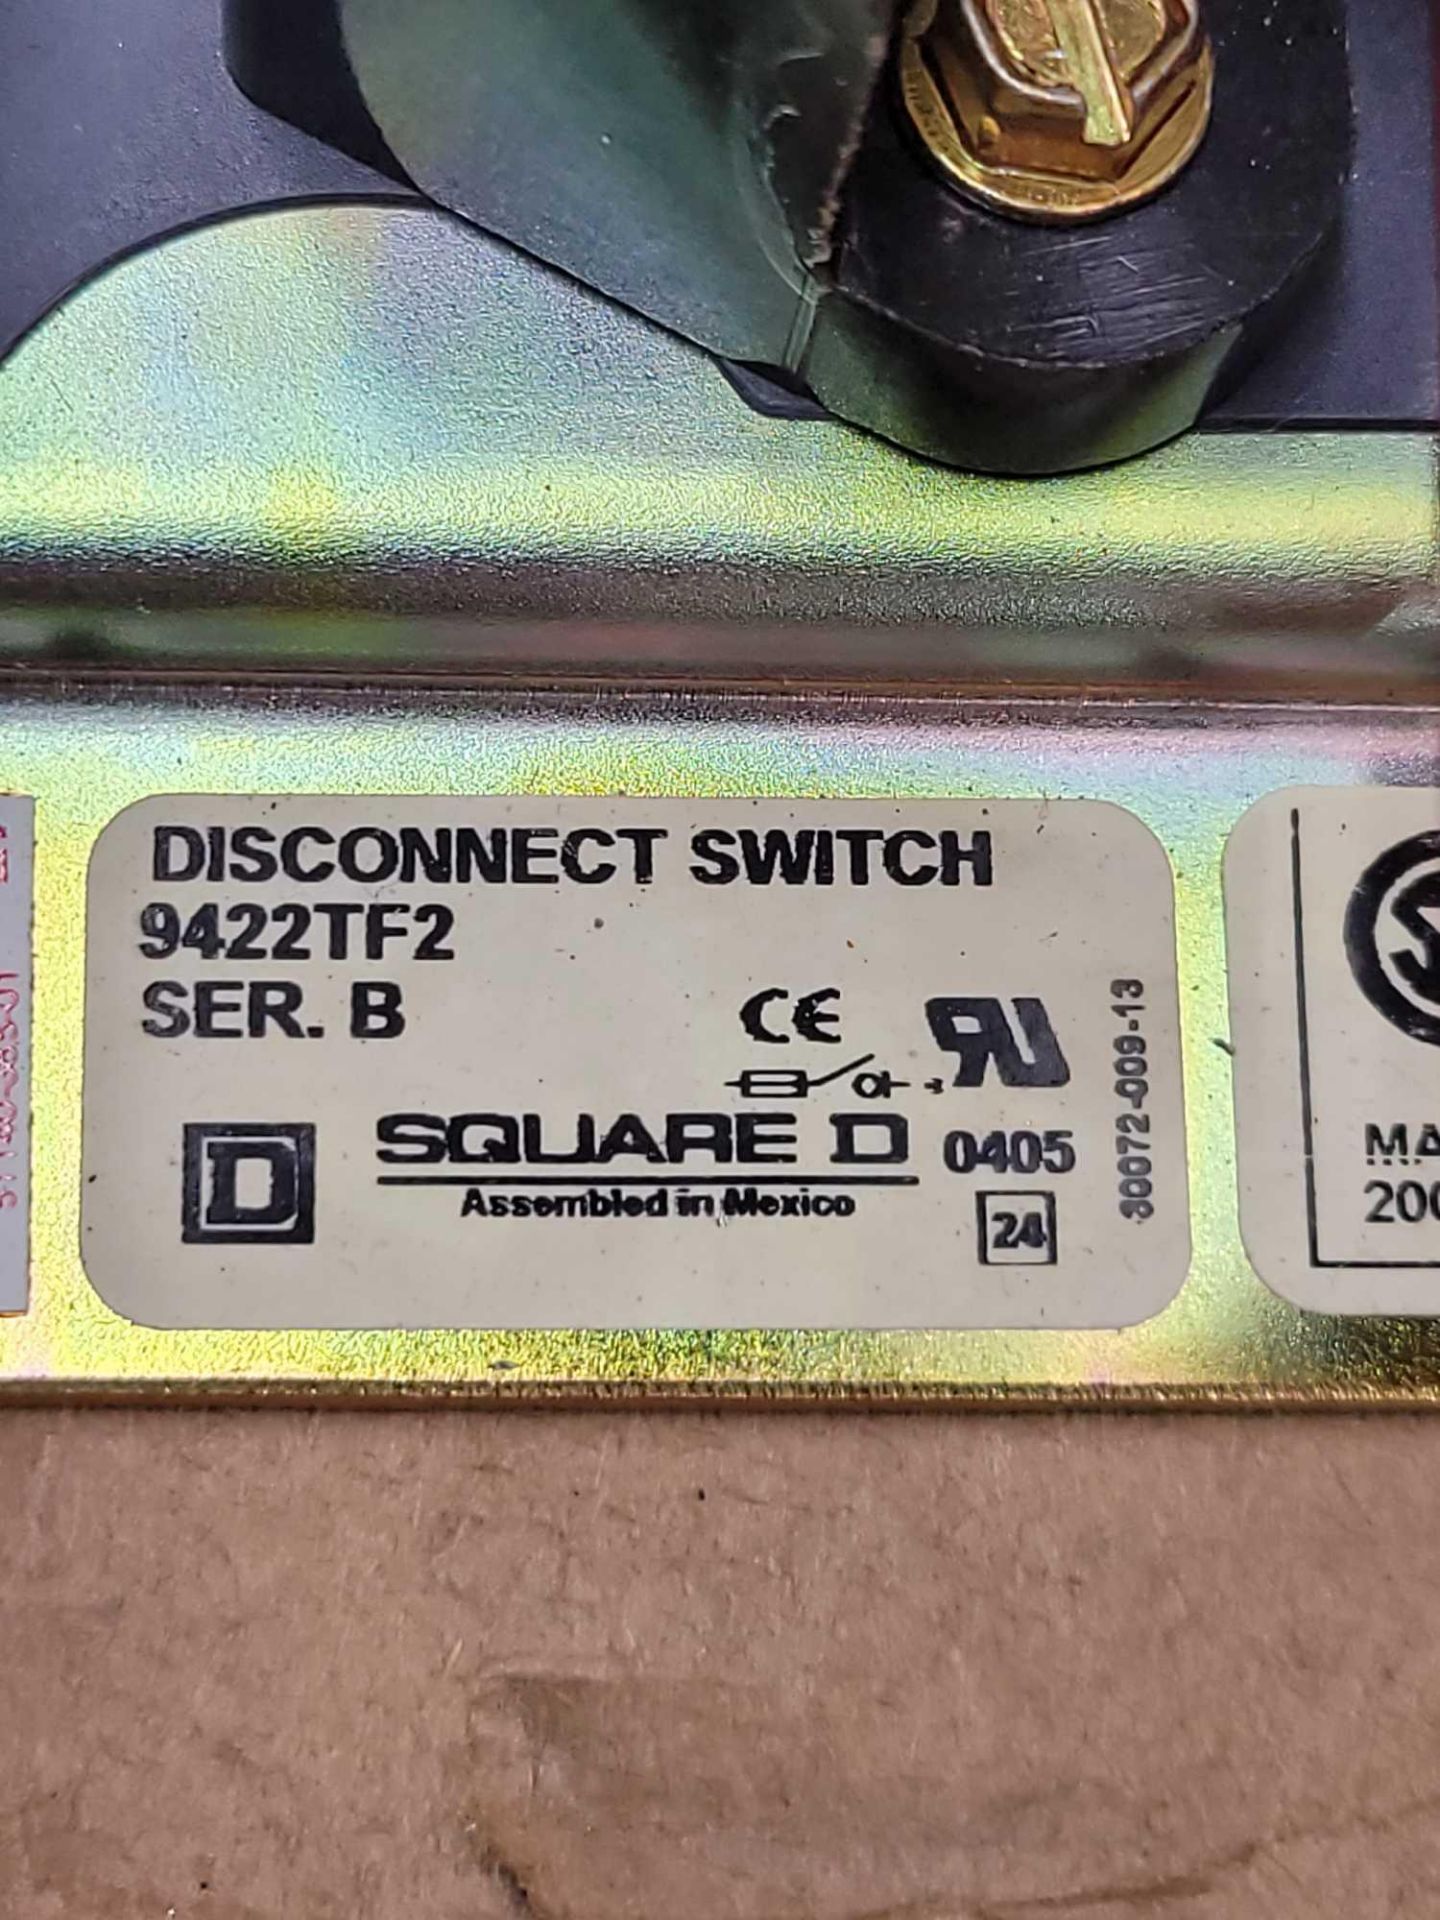 SQUARE D 9422TF2 / Series B Disconnect Switch  /  Lot Weight: 17.6 lbs - Image 3 of 6